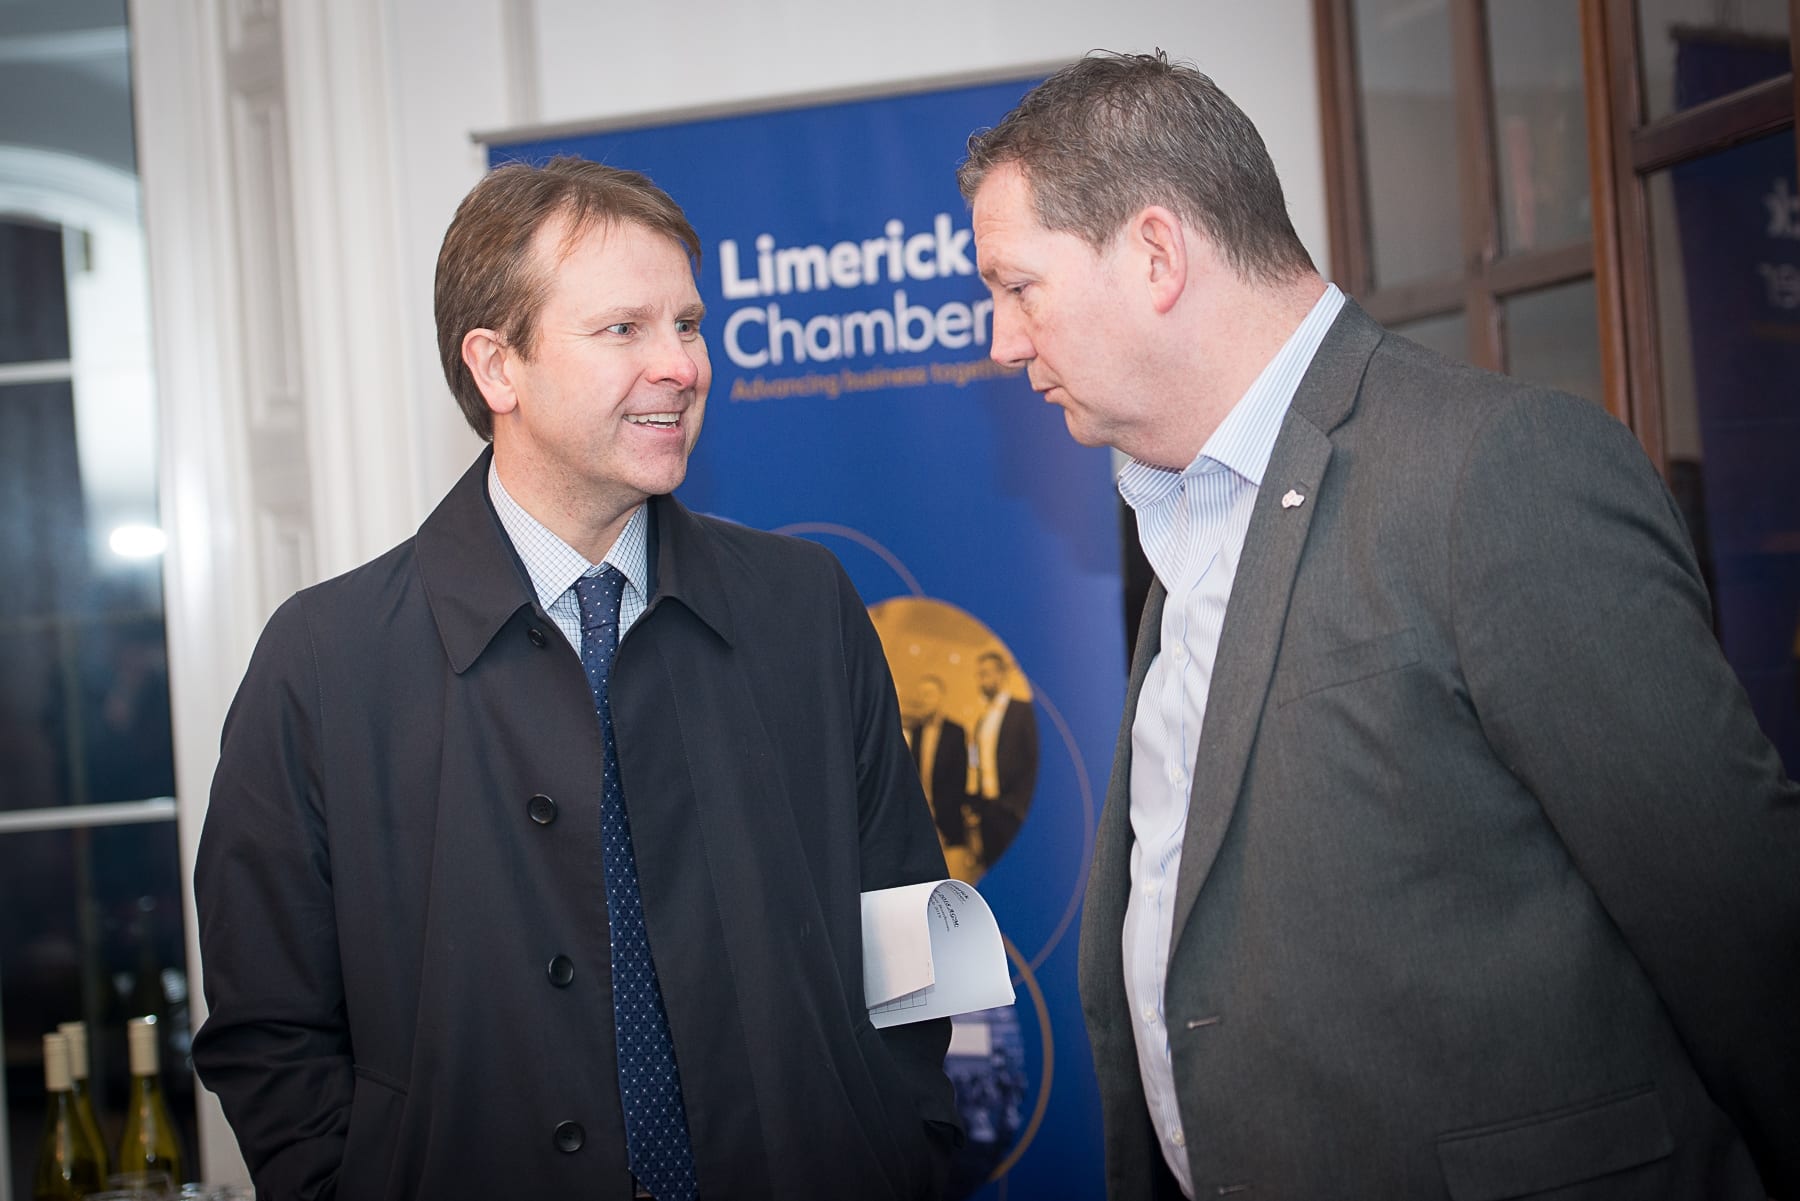 Limerick Chamber AGM which took place in the Limerick Chamber Boardroom on Tuesday 27th Feb 2019:  From left to right:Matt Thomas  - Shannon Group, Dr Liam Browne - Vice President LIT
Image by Morning Star Photography